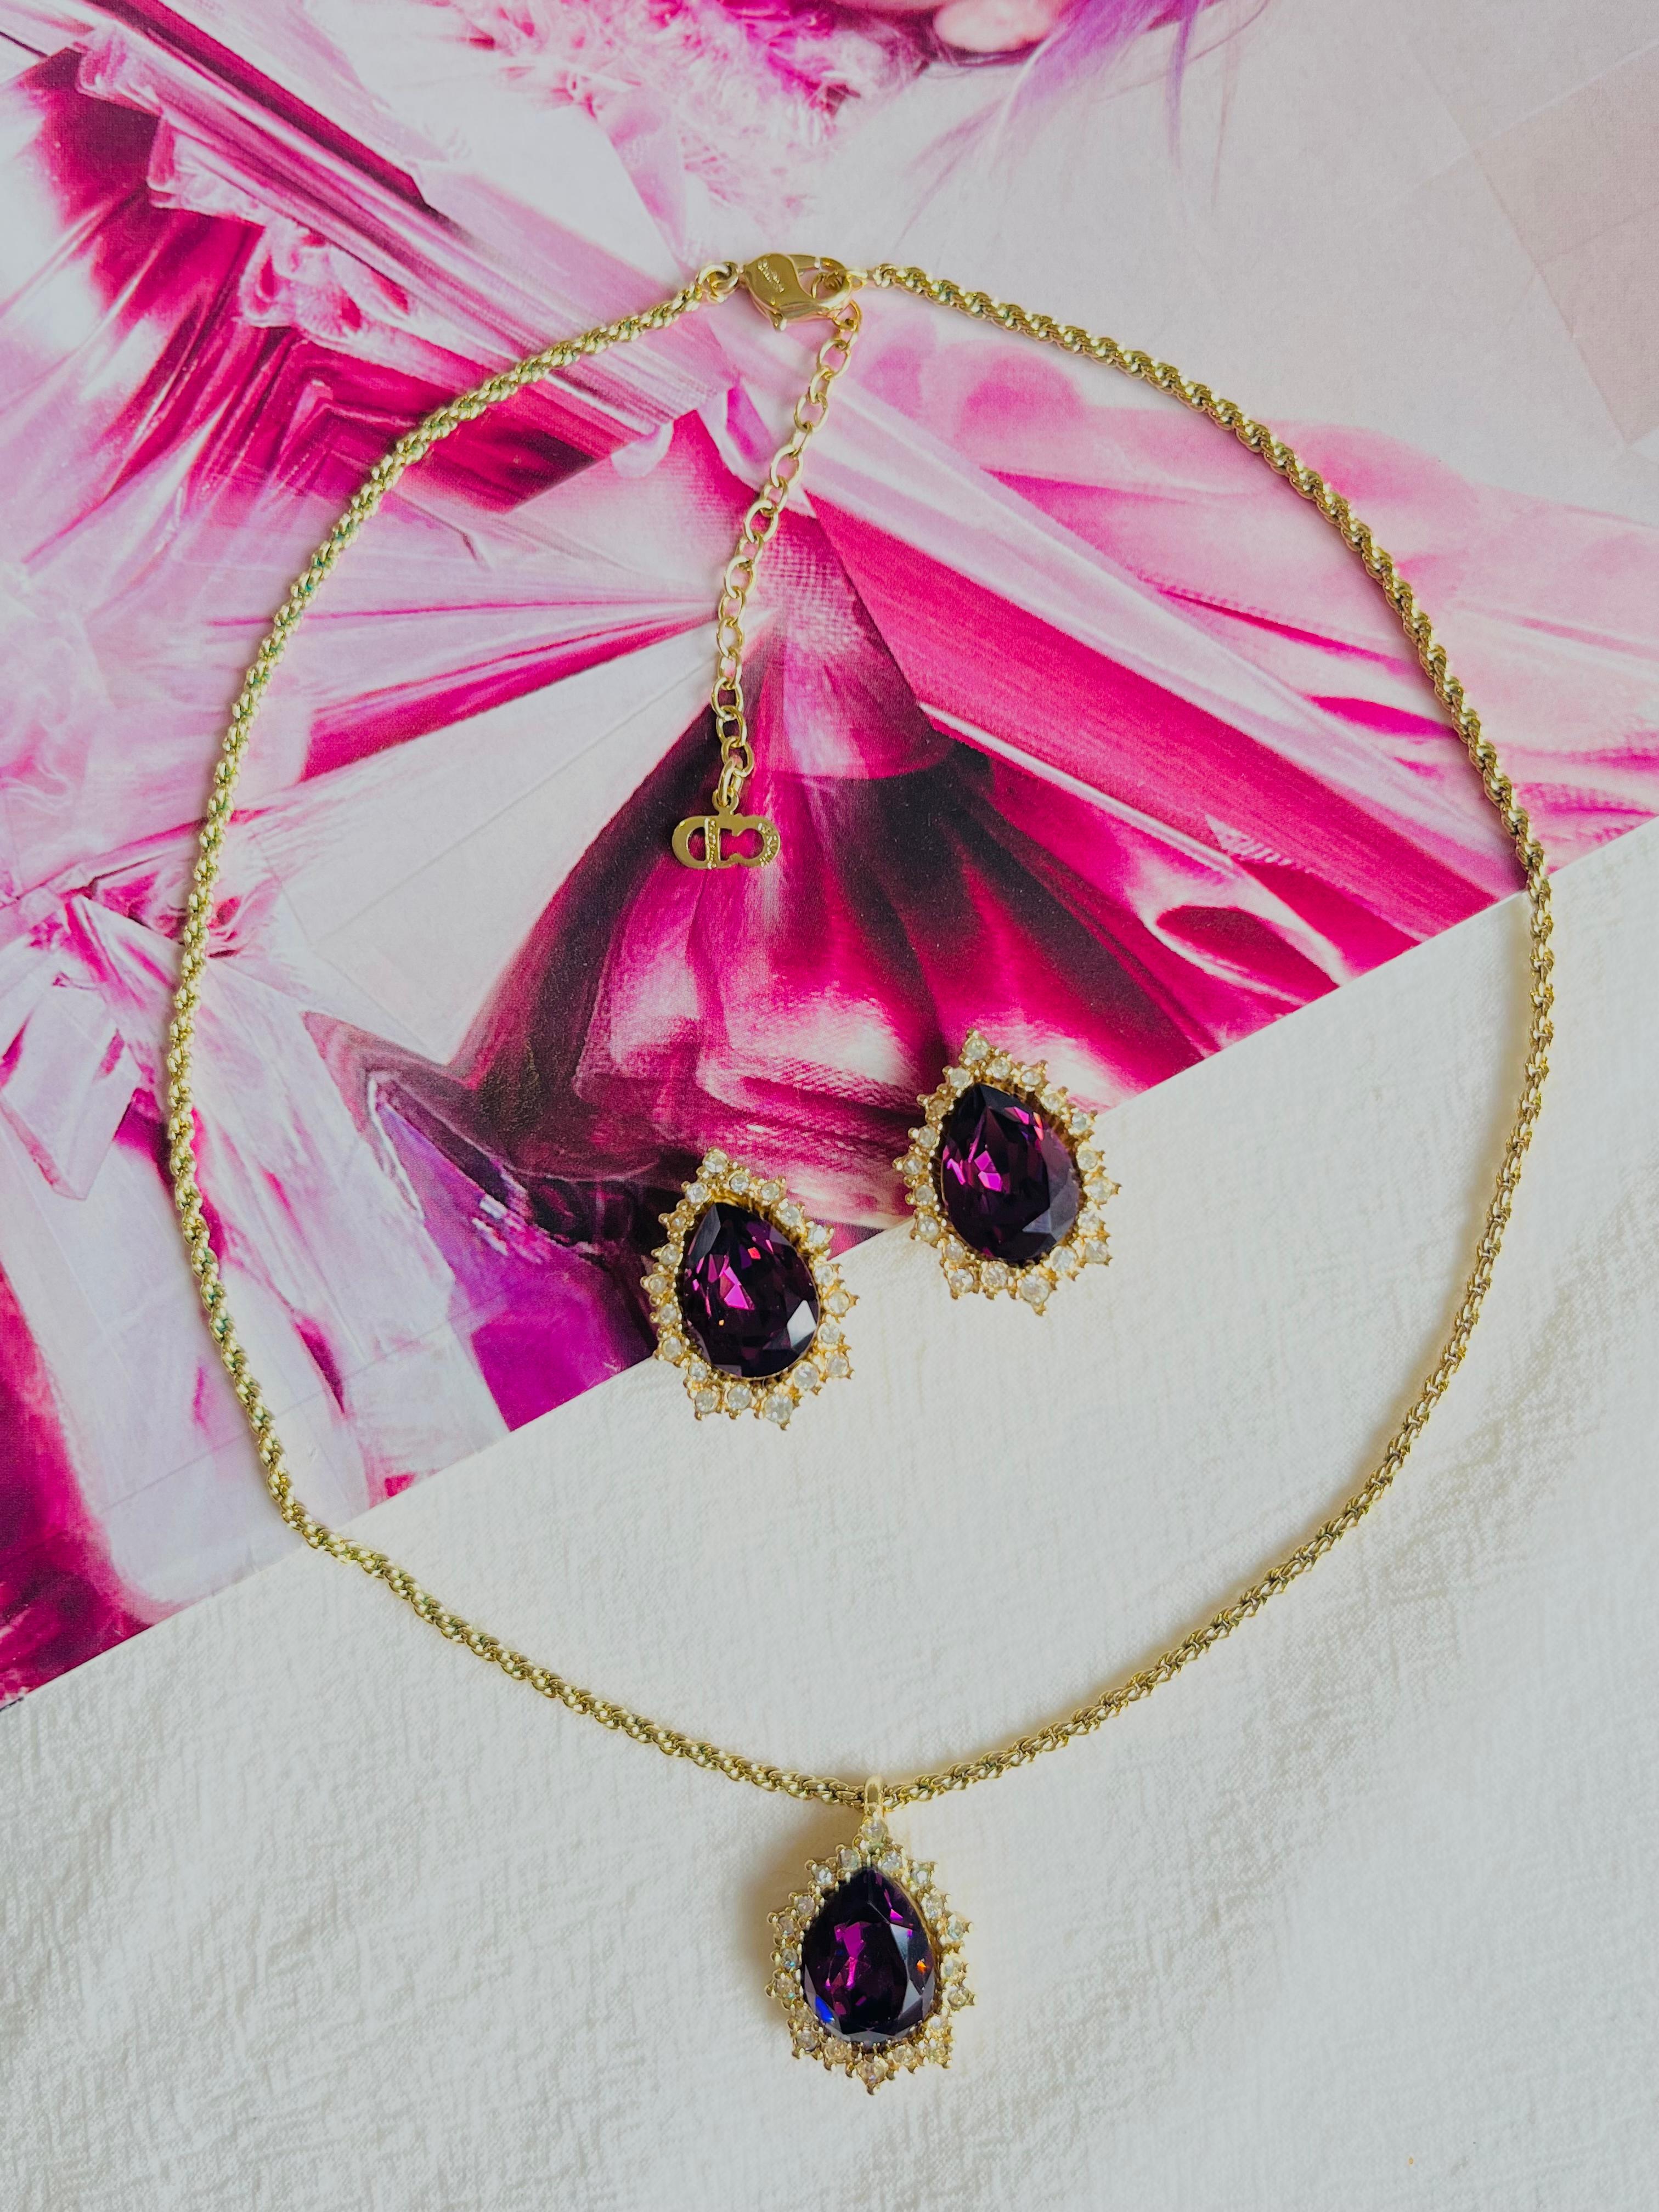 Christian Dior Vintage 1980 Purple Amethyst Halo Teardrop Gift Set, Pendant Necklace Earrings, Gold Tone

Very good condition. 100% Genuine. Vintage and rare to find.

Signed 